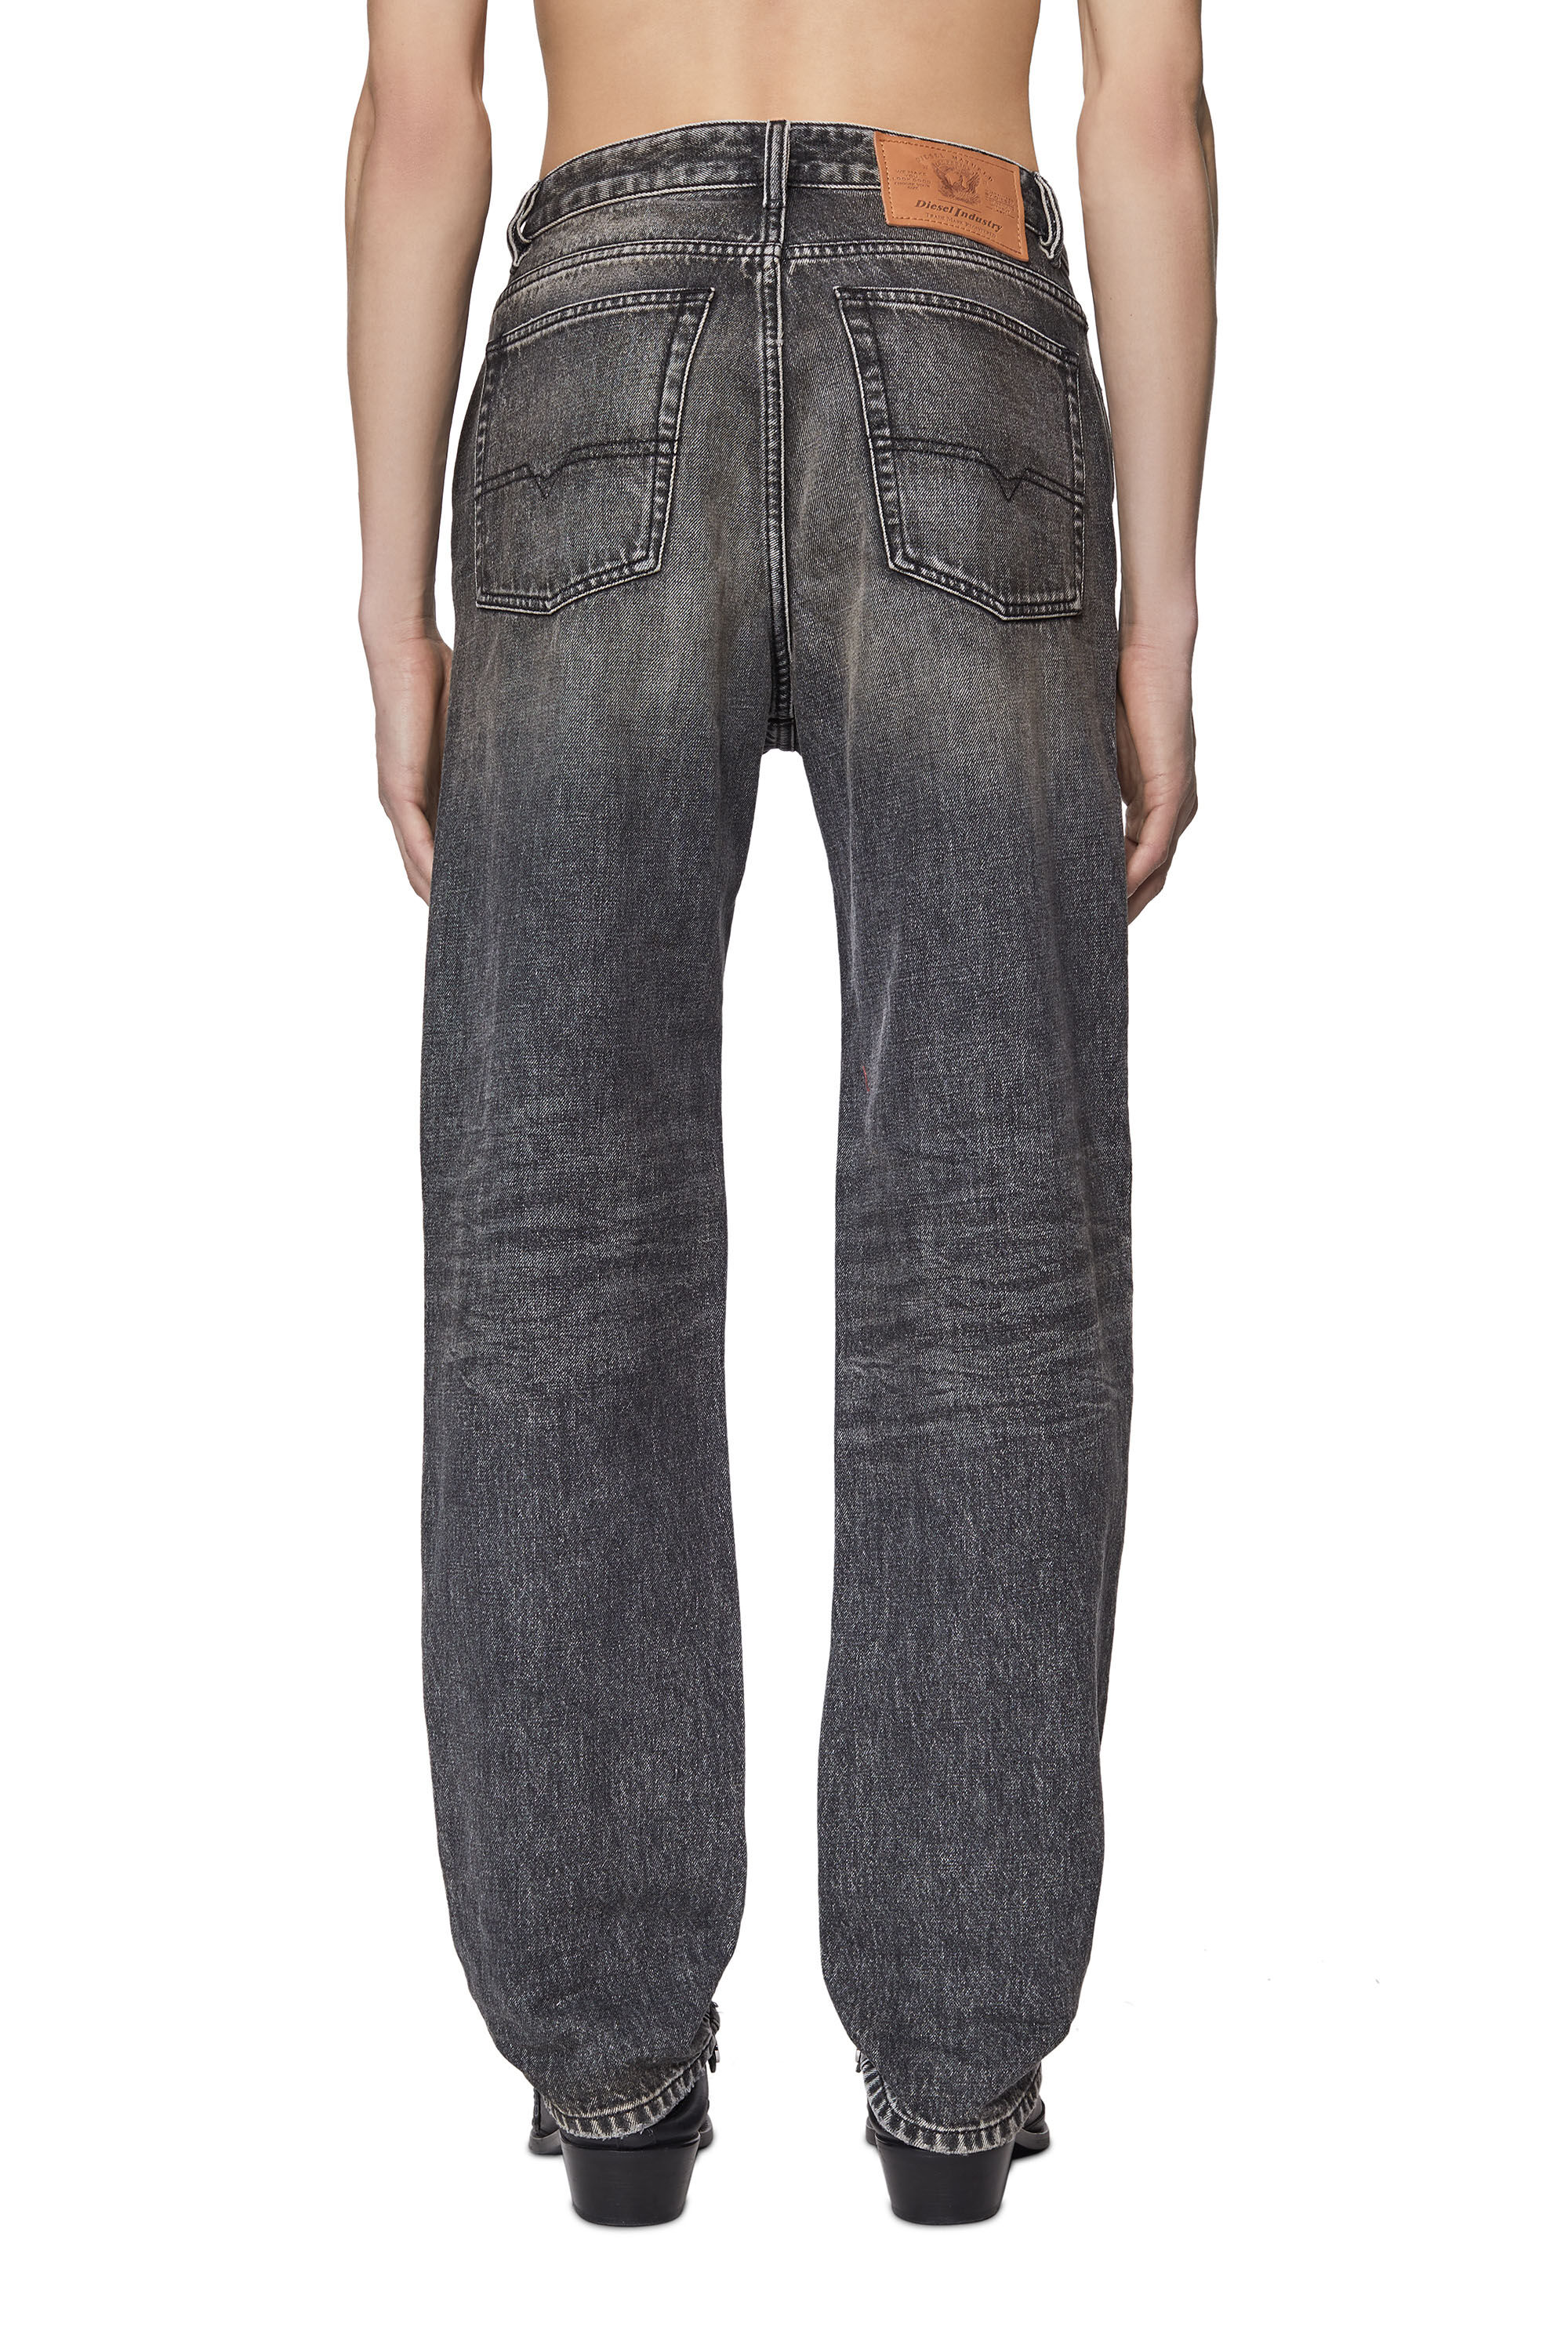 Diesel - 1955 007A8 Straight Jeans,  - Image 4